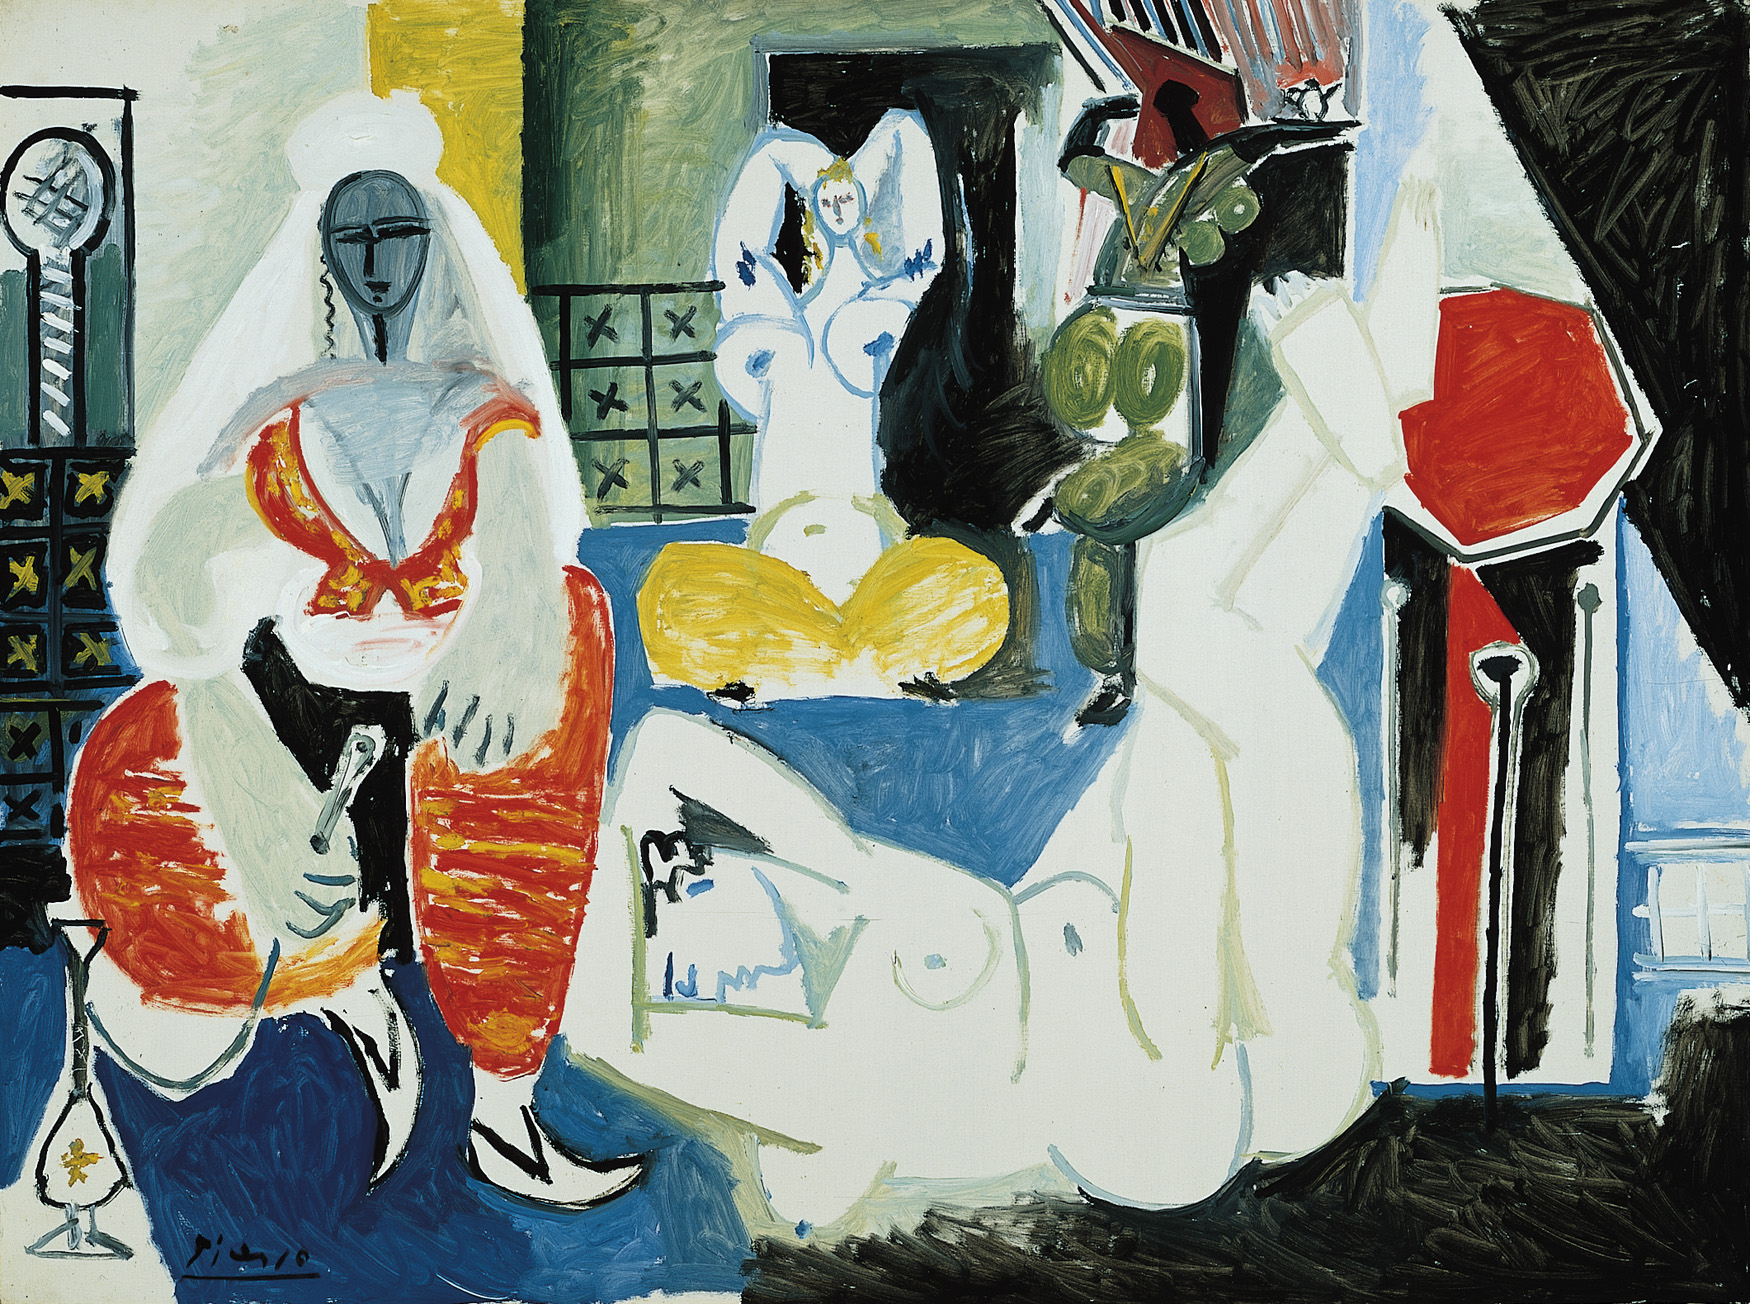 Pablo Picasso (Spanish, 1881-1973) Women of Algiers, Version “I”, January 25, 1955 Oil on canvas 38-1/8 x 51-1/8 in. (96.8 x 129.9 cm) Norton Simon Art Foundation © 2019 Estate of Pablo Picasso / Artists Rights Society (ARS), New York